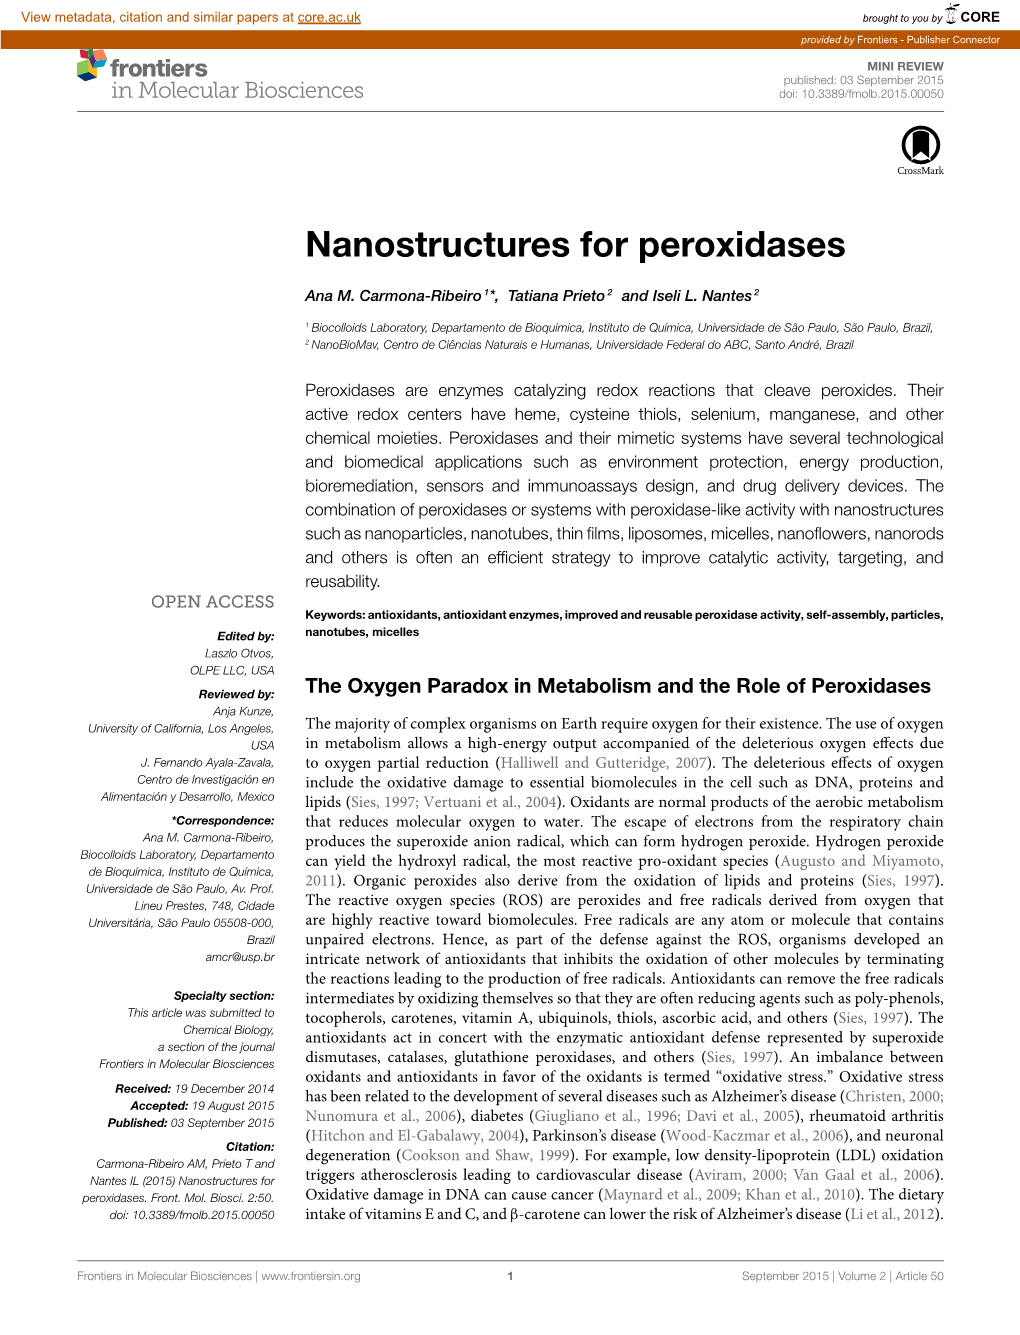 Nanostructures for Peroxidases